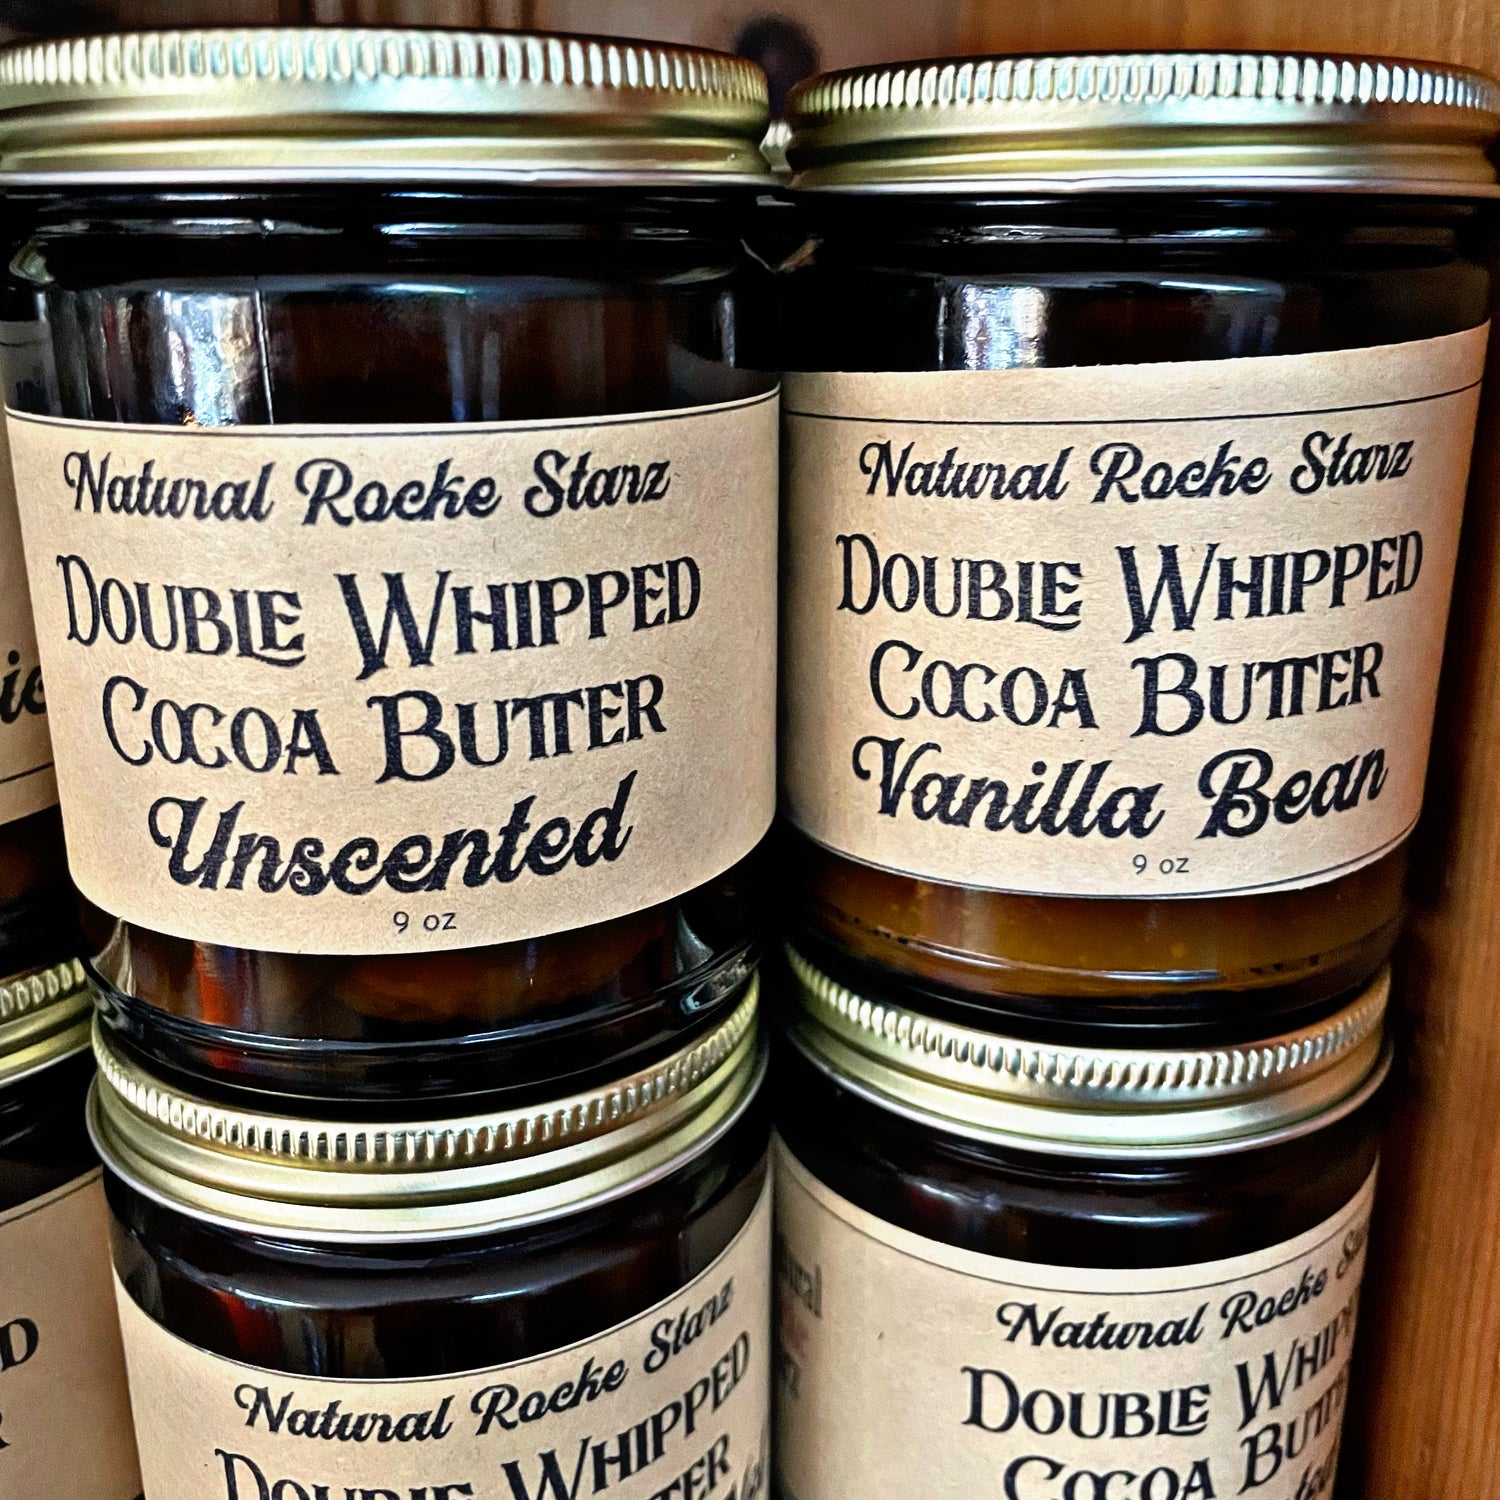 Doubled Whipped Cocoa Body Butters